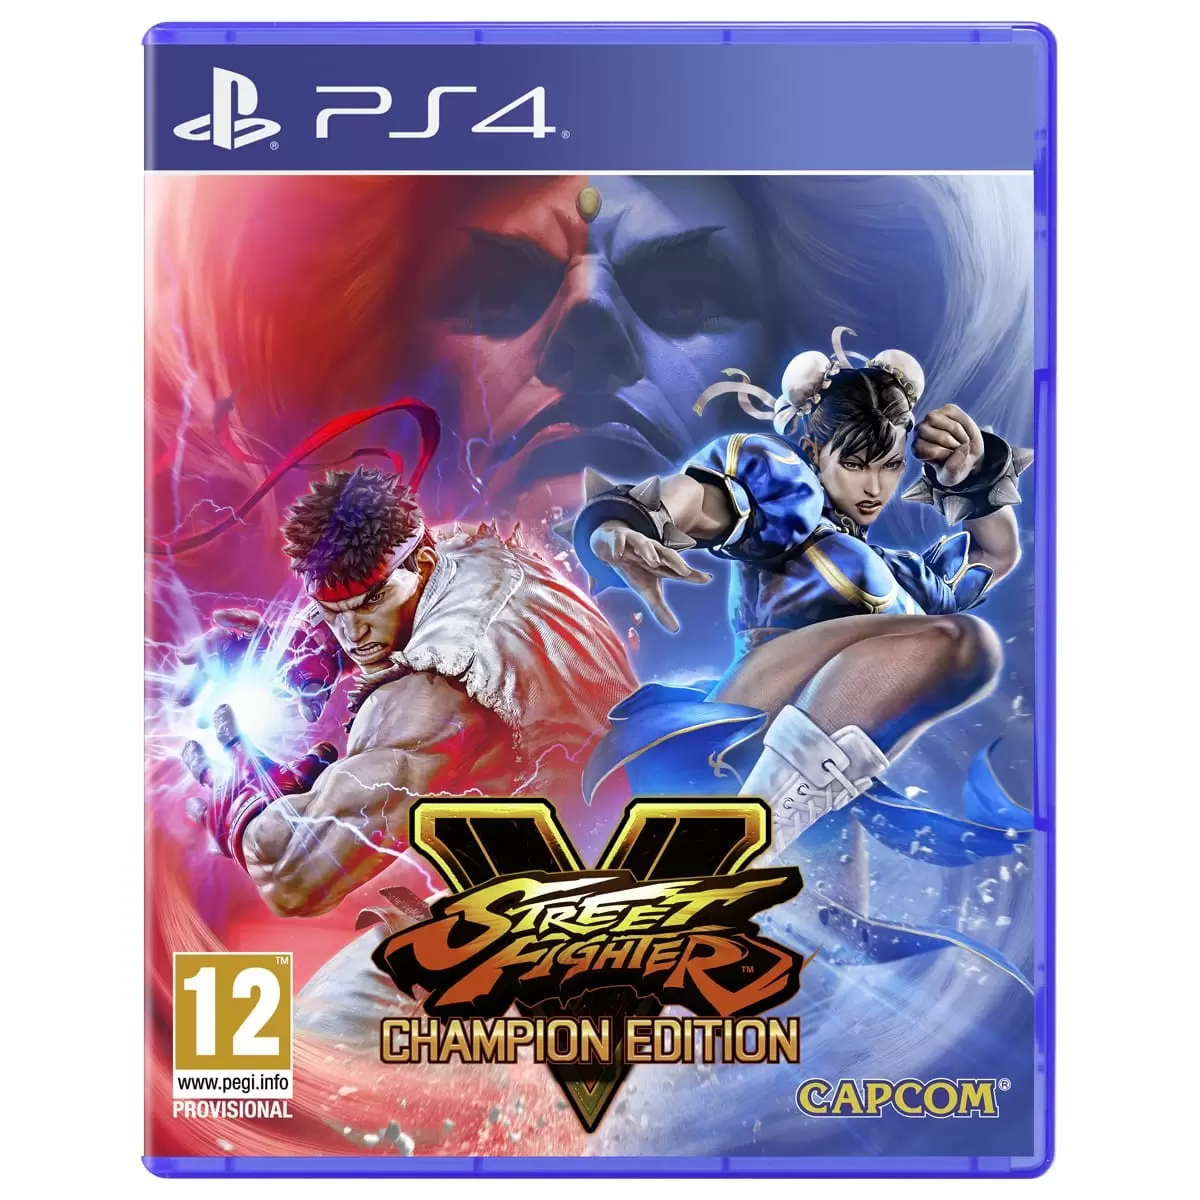 PS4 Games - Street Fighter V Champions Edition